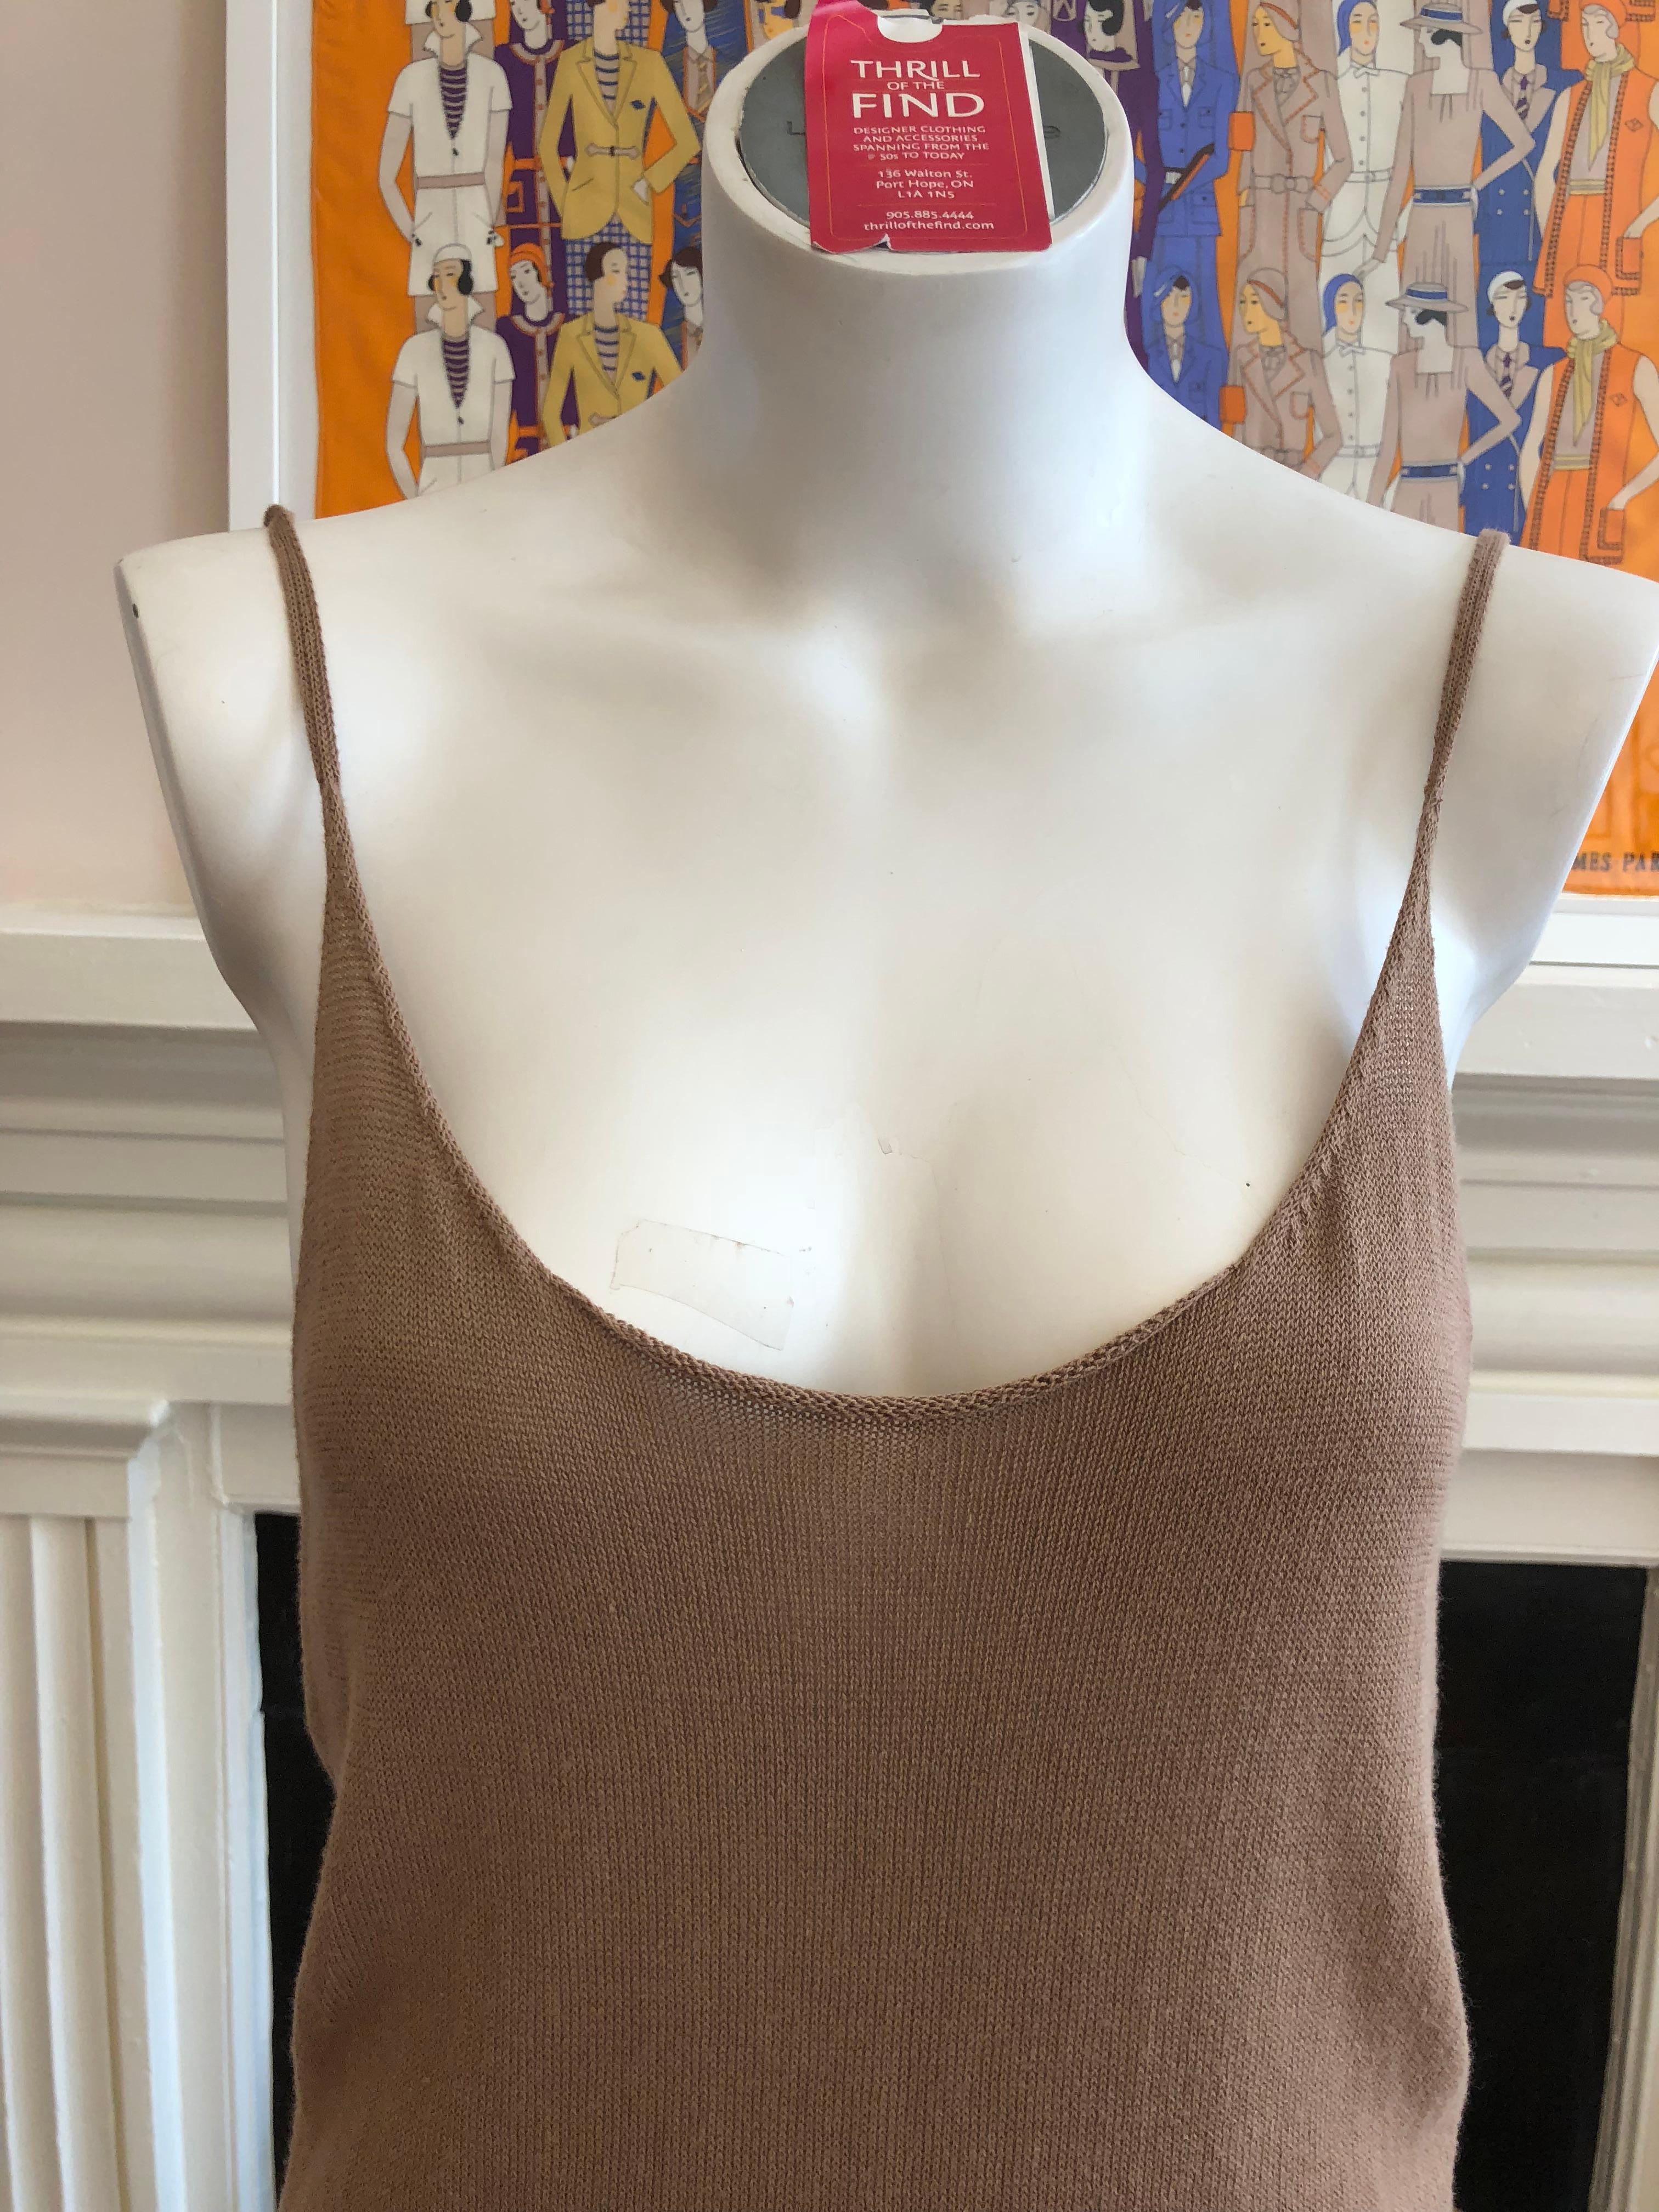 Made in Belgium this is a very nice quality cotton top with spaghetti straps and ribbed hem. Please note that there is stretch to the material.